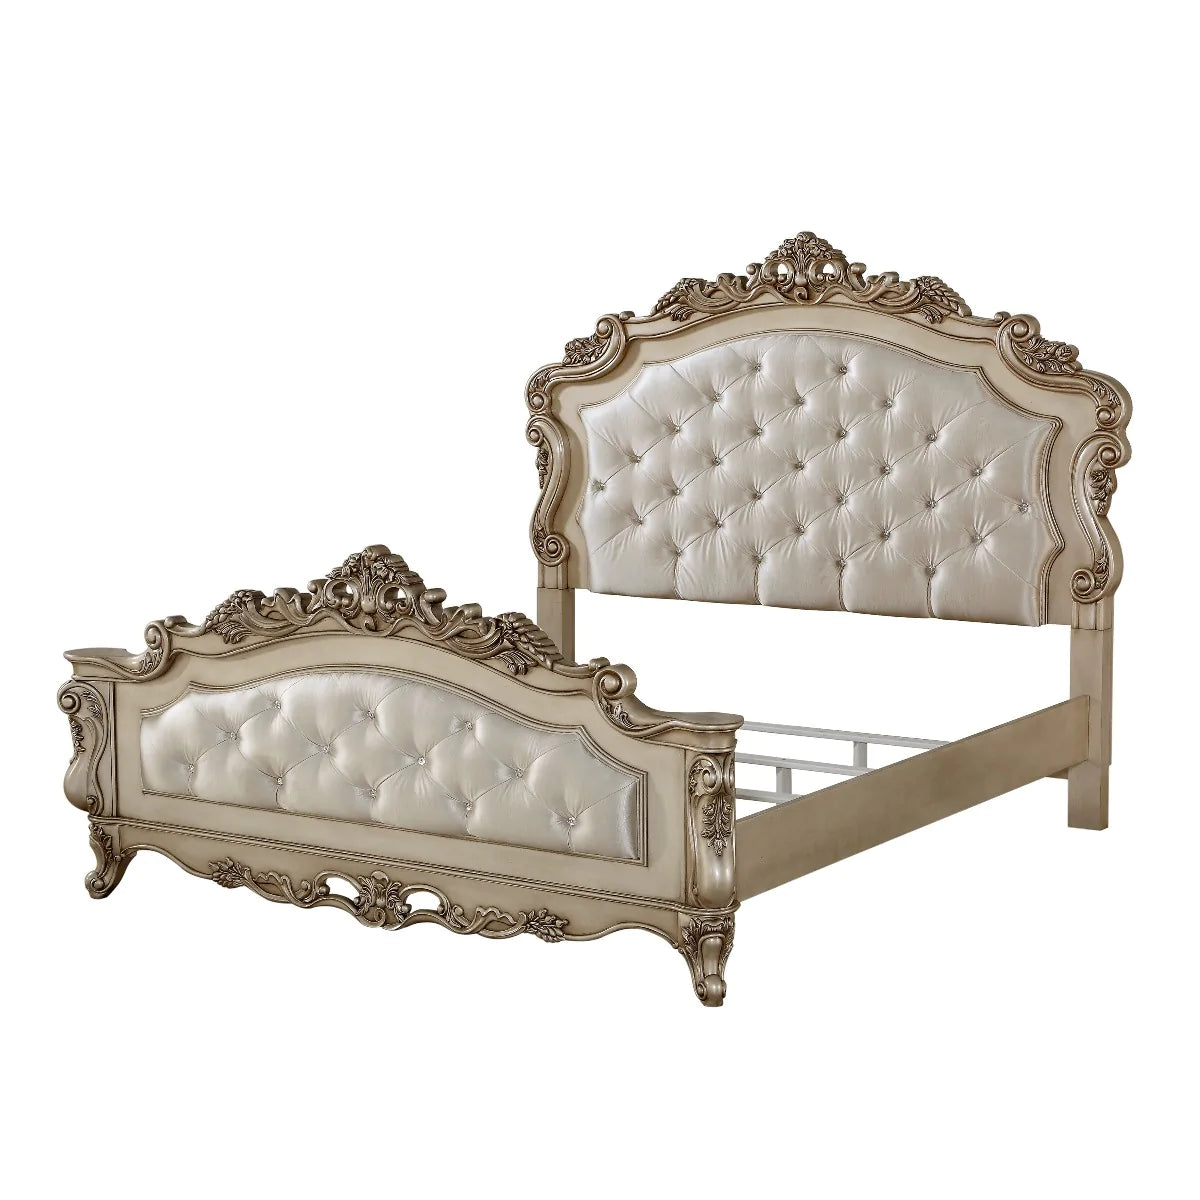 Gorsedd Fabric & Antique White California King Bed Model 27434CK By ACME Furniture